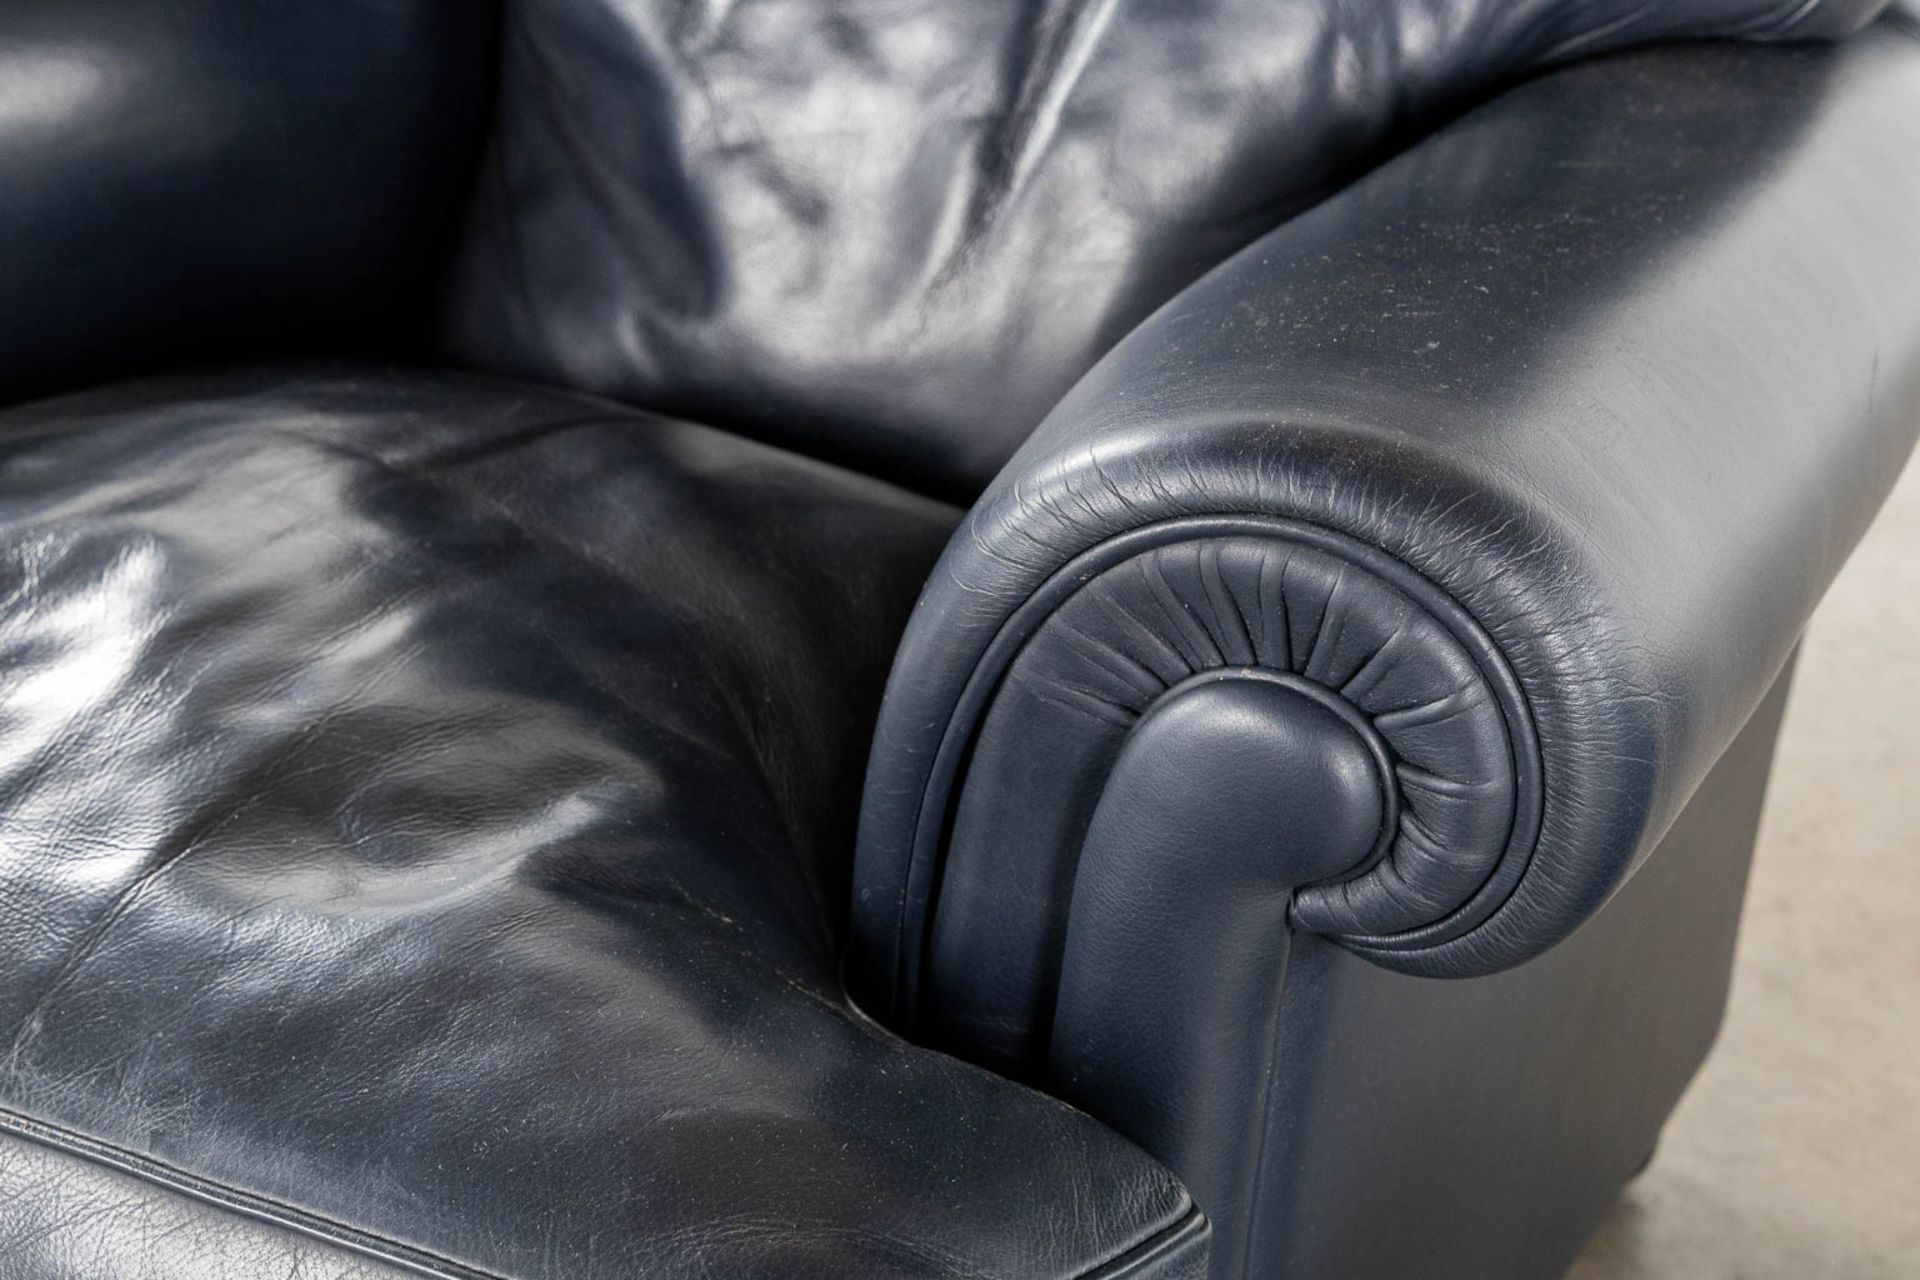 Poltrona Frau, a leather relaxing chair and matching ottoman. (L:90 x W:90 x H:88 cm) - Image 7 of 16